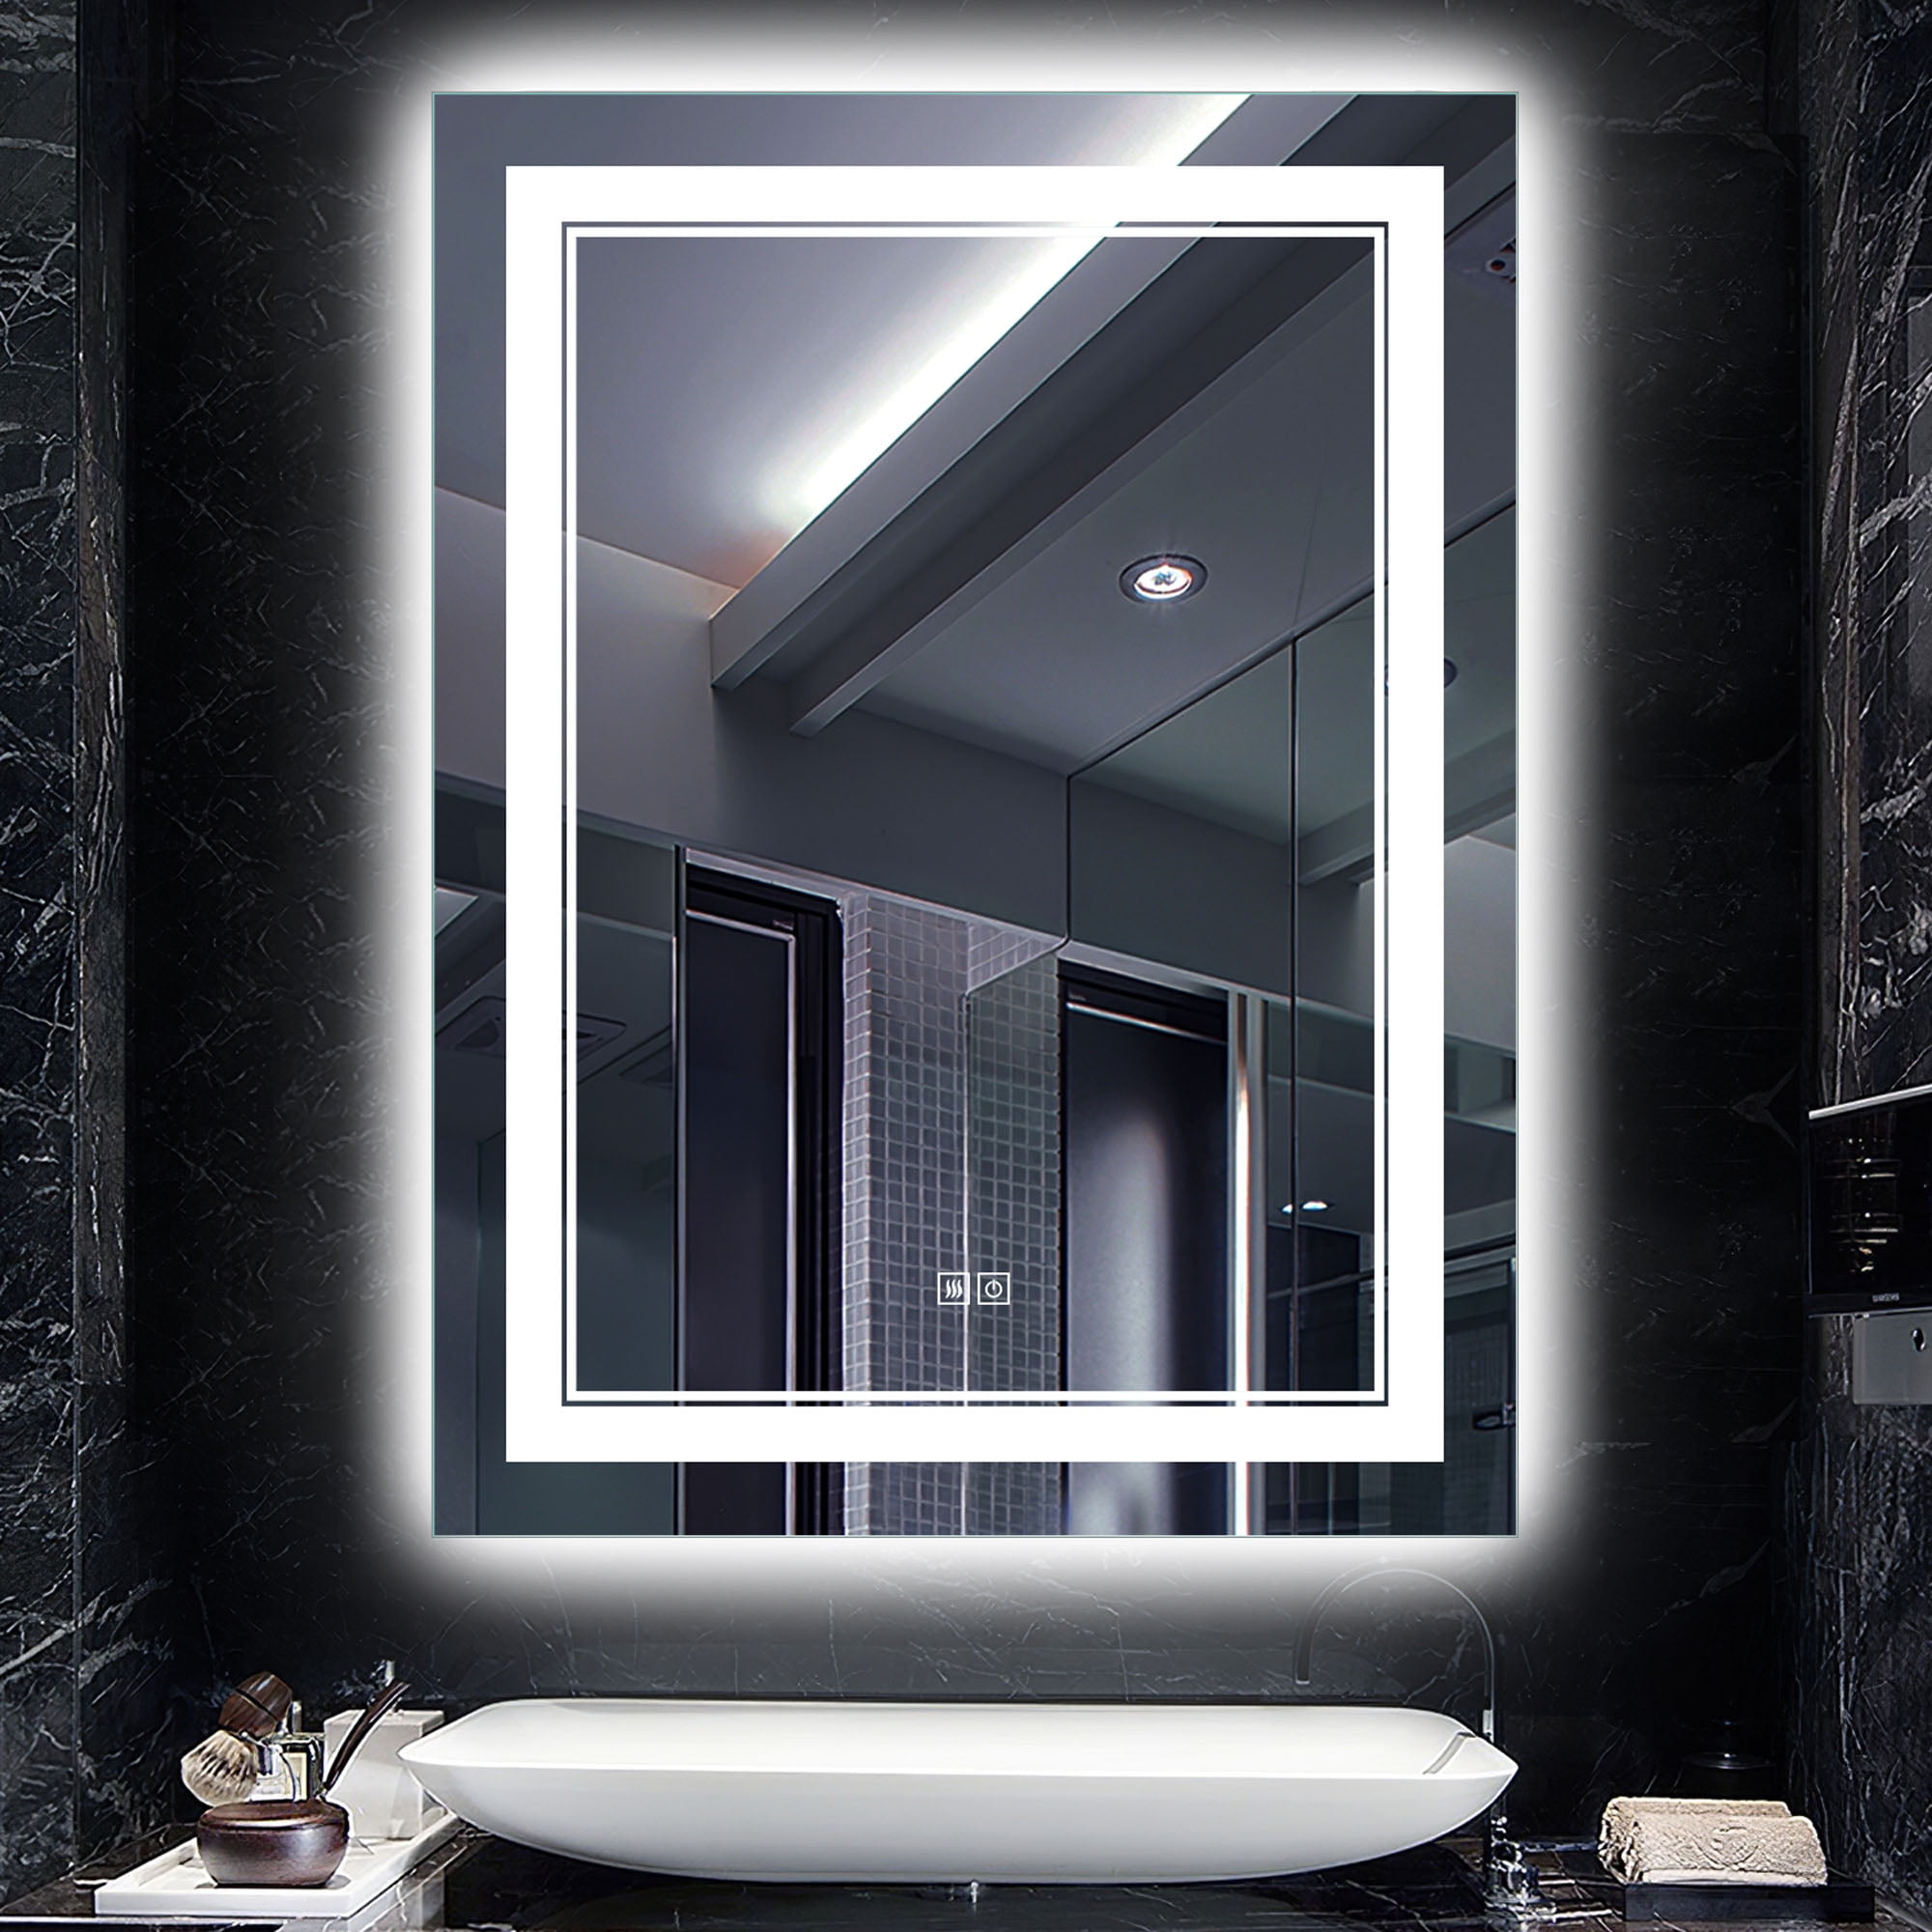 Details about   Mirror Wall Bathroom LED Lamp Vanity Makeup Light Lighted Dressing Anti Fog Room 